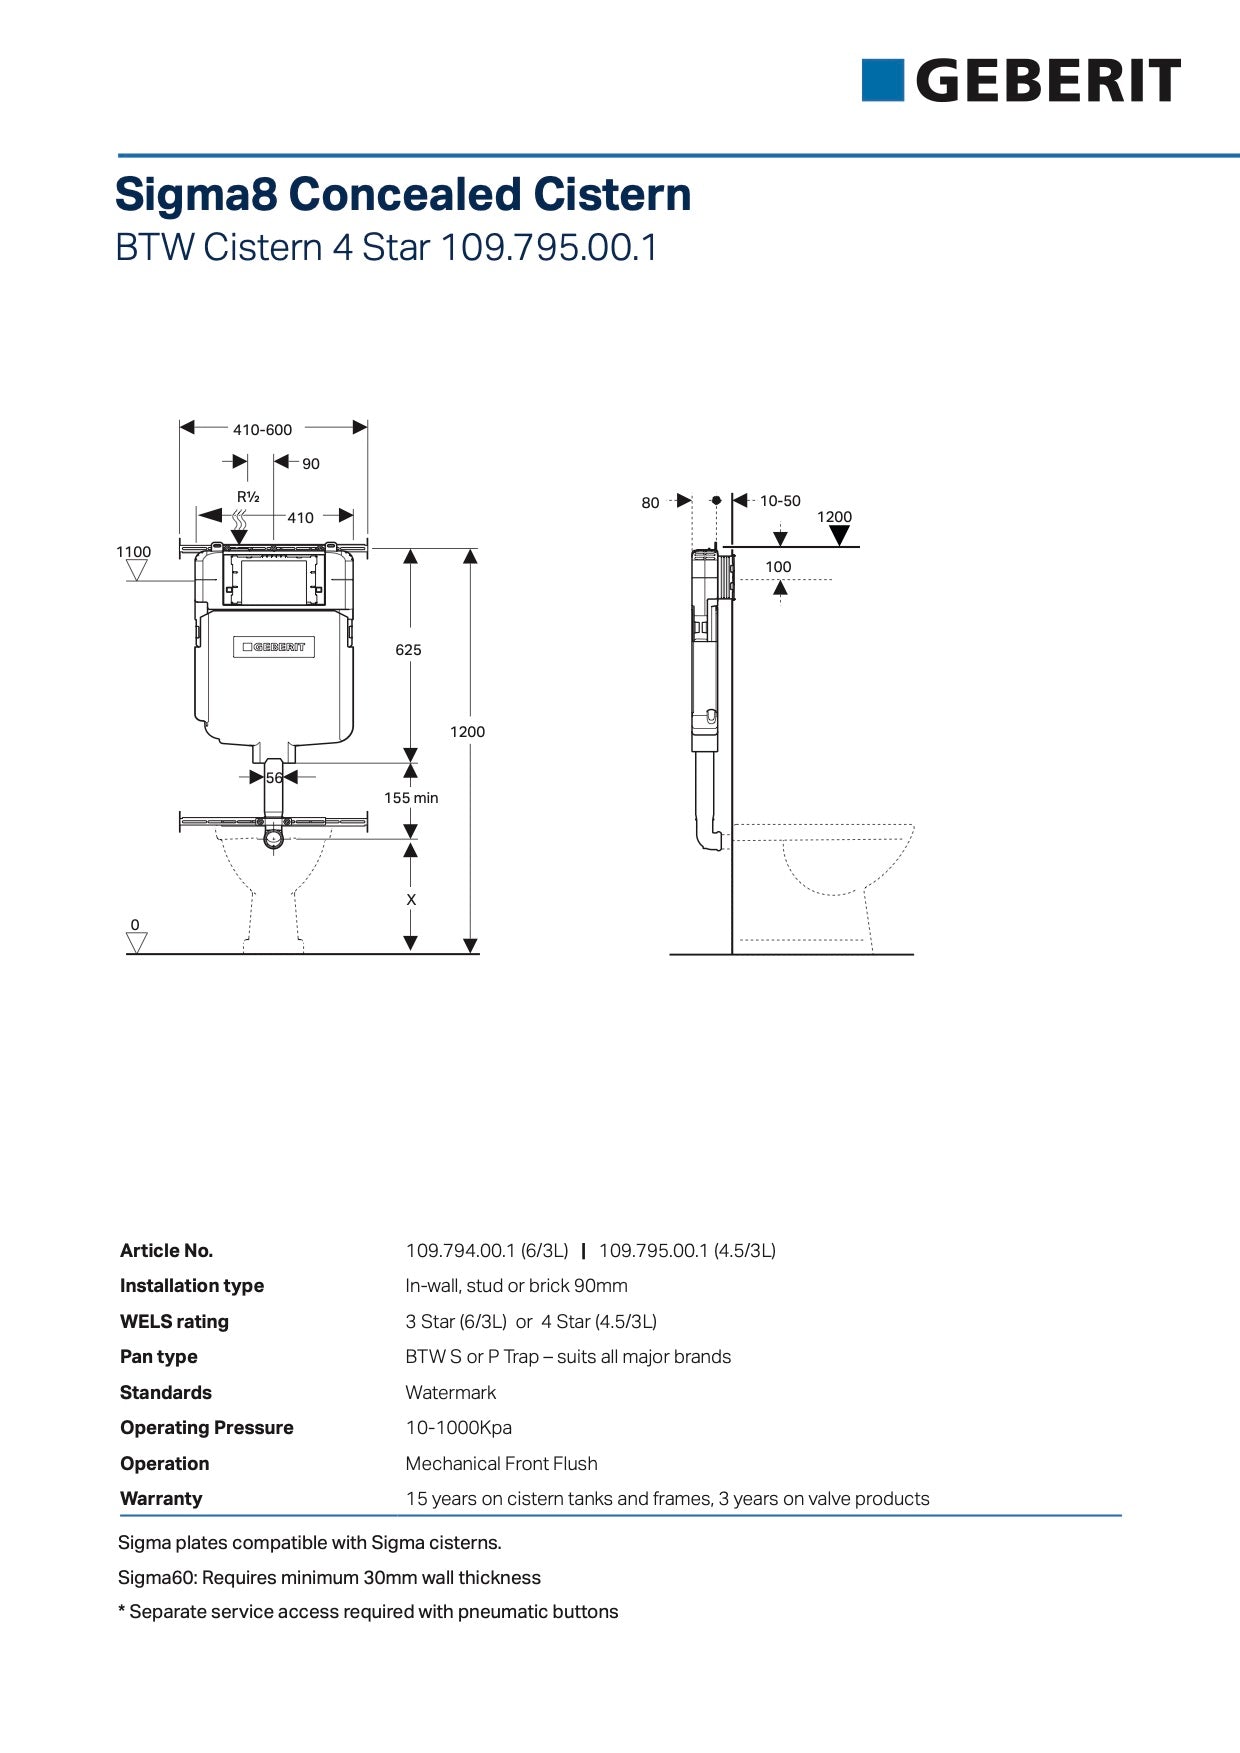 Geberit Sigma8 Concealed Cistern to suit The Eyre Rimless Concealed Cistern Toilets